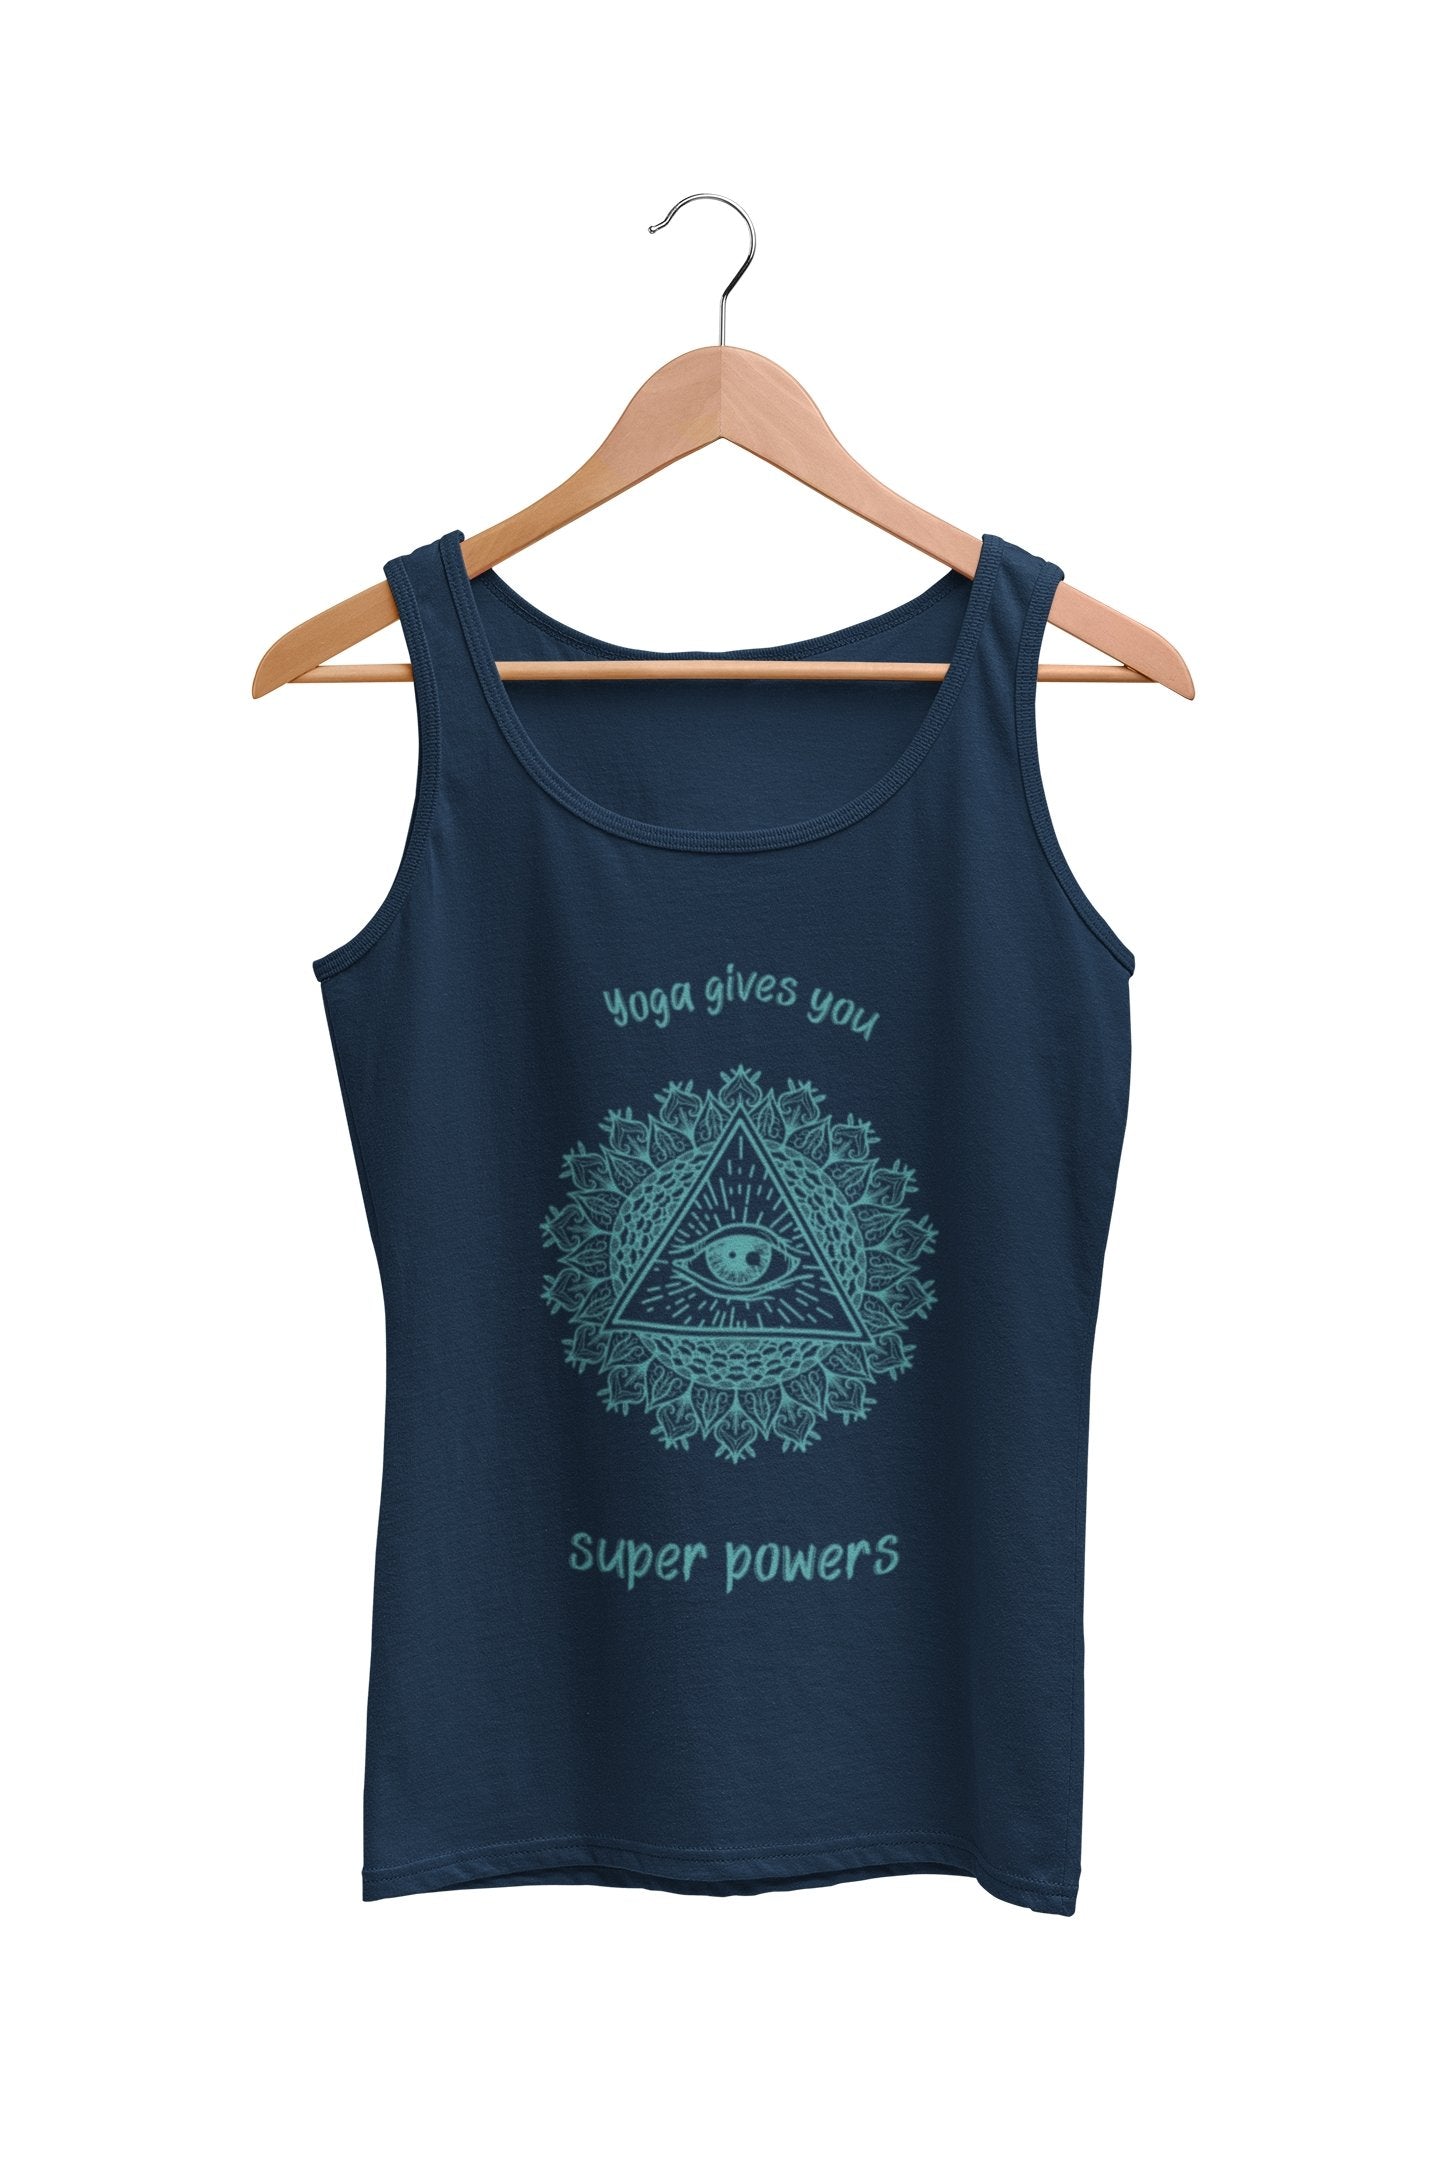 thelegalgang,Yoga Give You Super Powers Graphic Tank Top,TANK TOP.